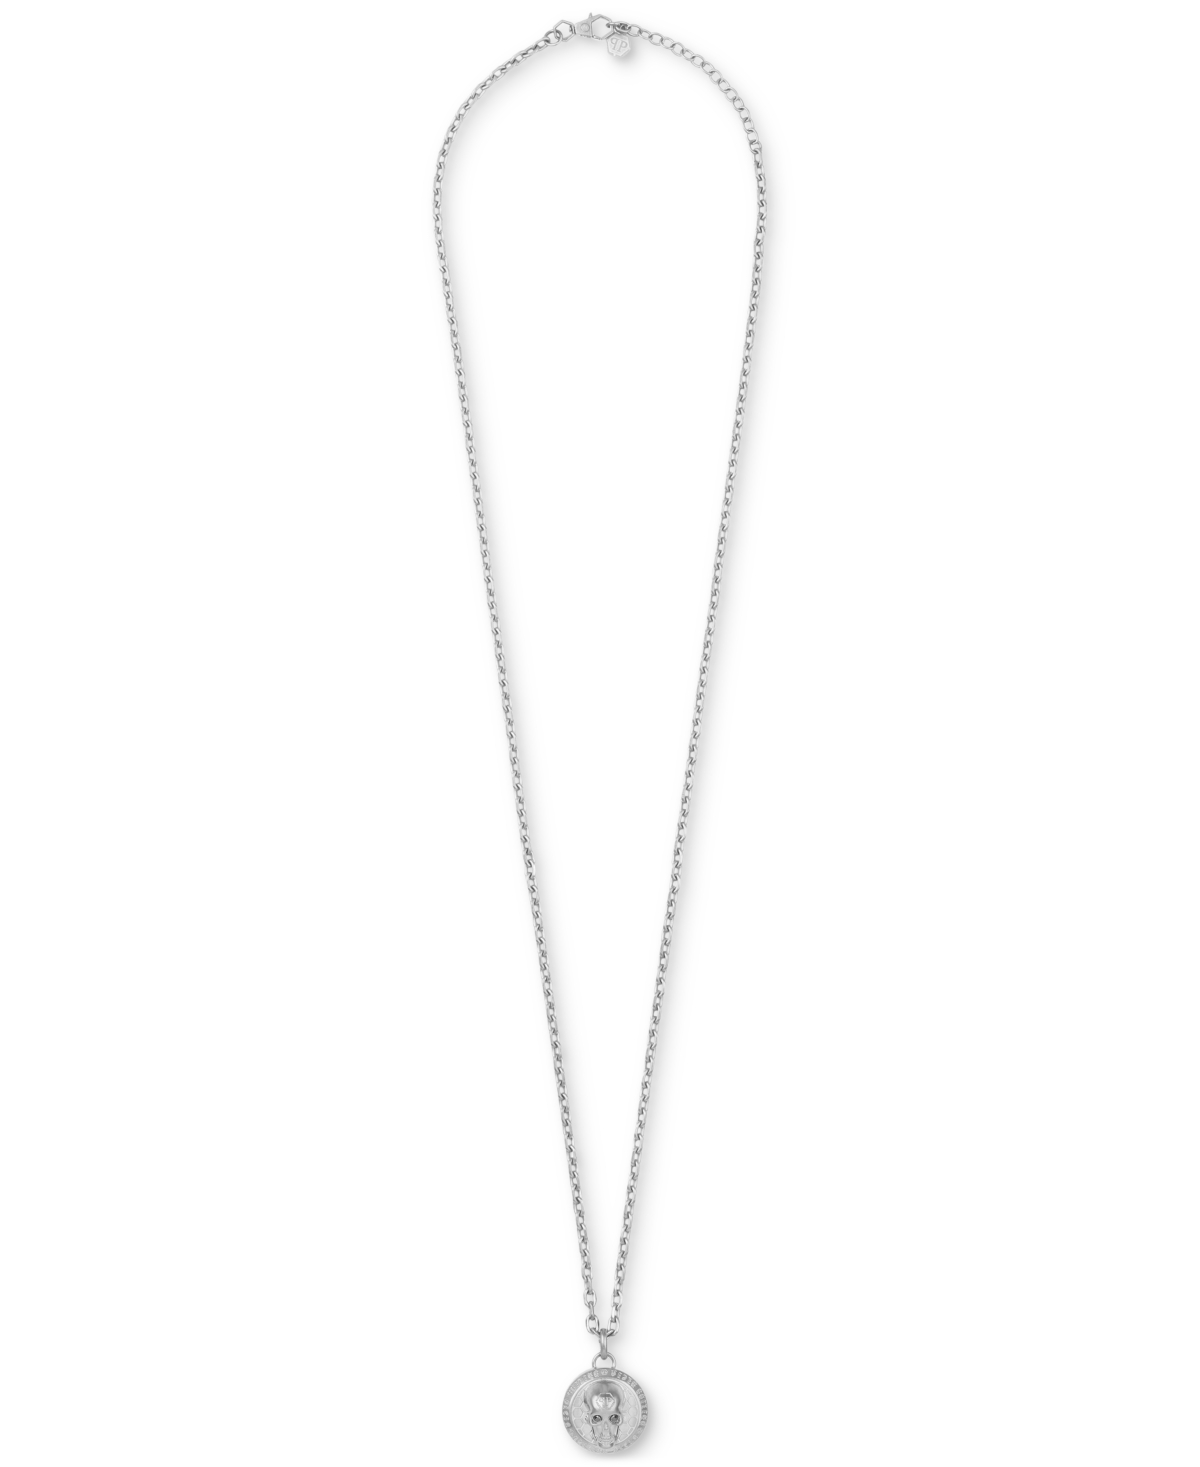 Stainless Steel 3D $kull Cable Chain 29-1/2" Pendant Necklace - Stainless Steel